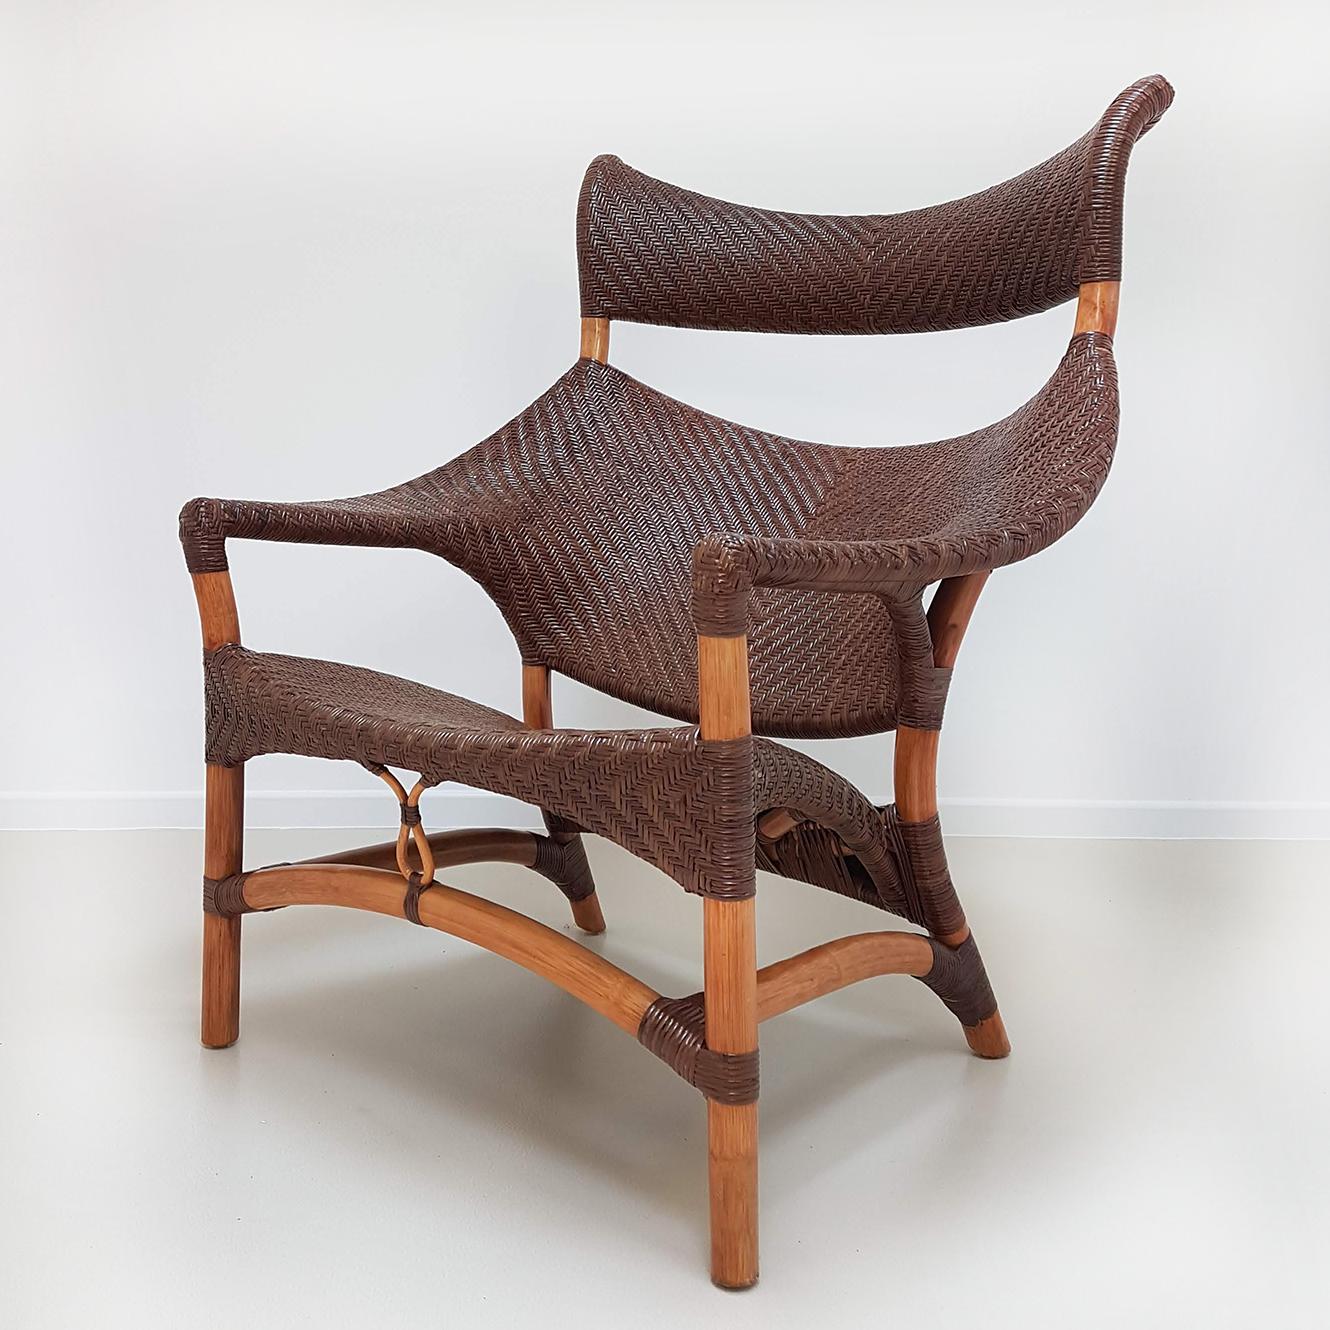 Lacquered Rattan Chair and Foot Rest by Yuzru Yamakawa, Japan, 1980